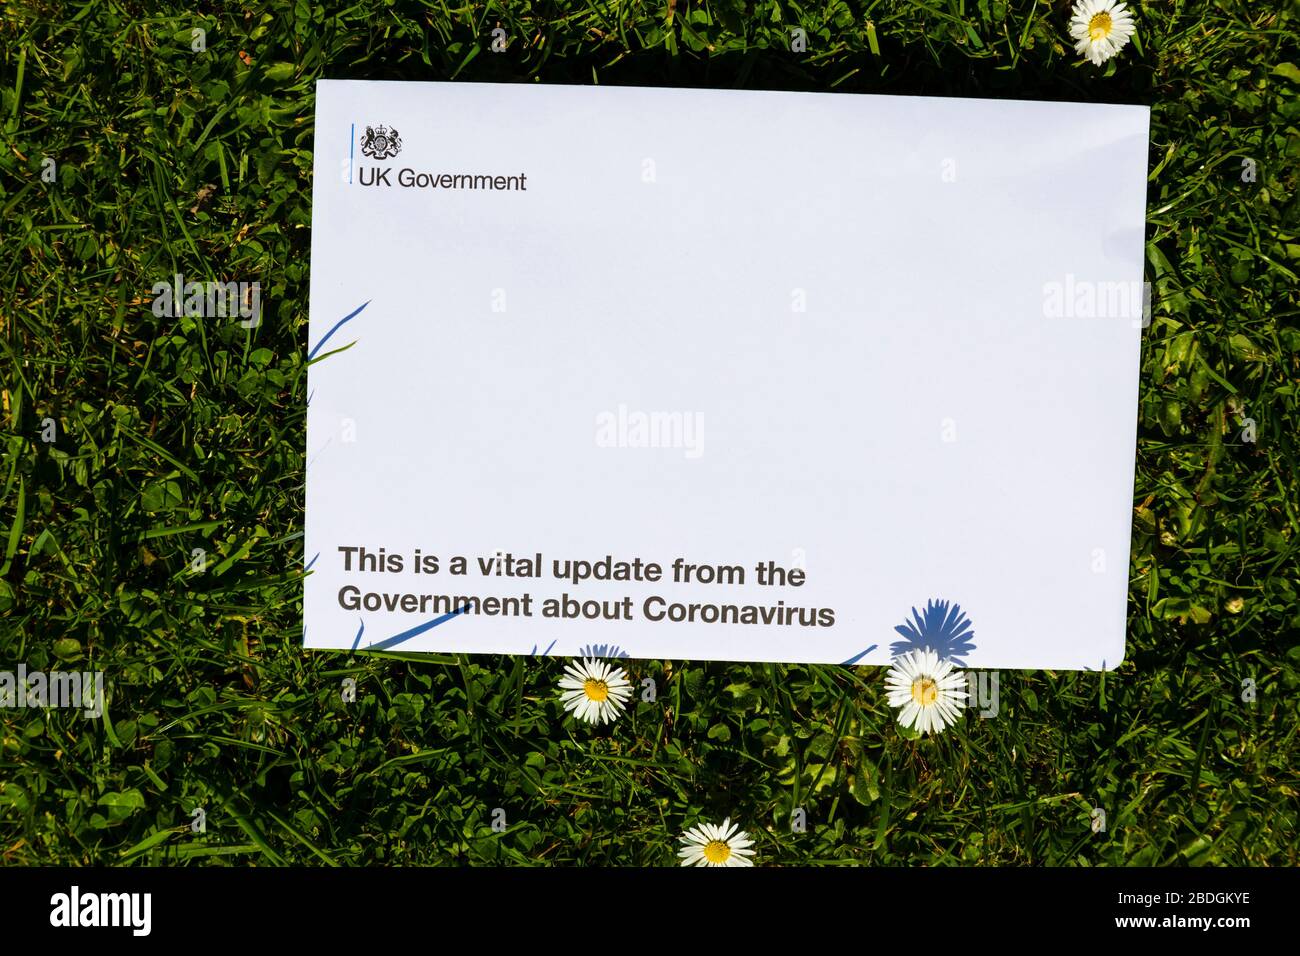 Letter from the British government explaining the need to stay indoors while the Covid-19 Corona virus is pandemic. On grass with daisy flowers. Stock Photo